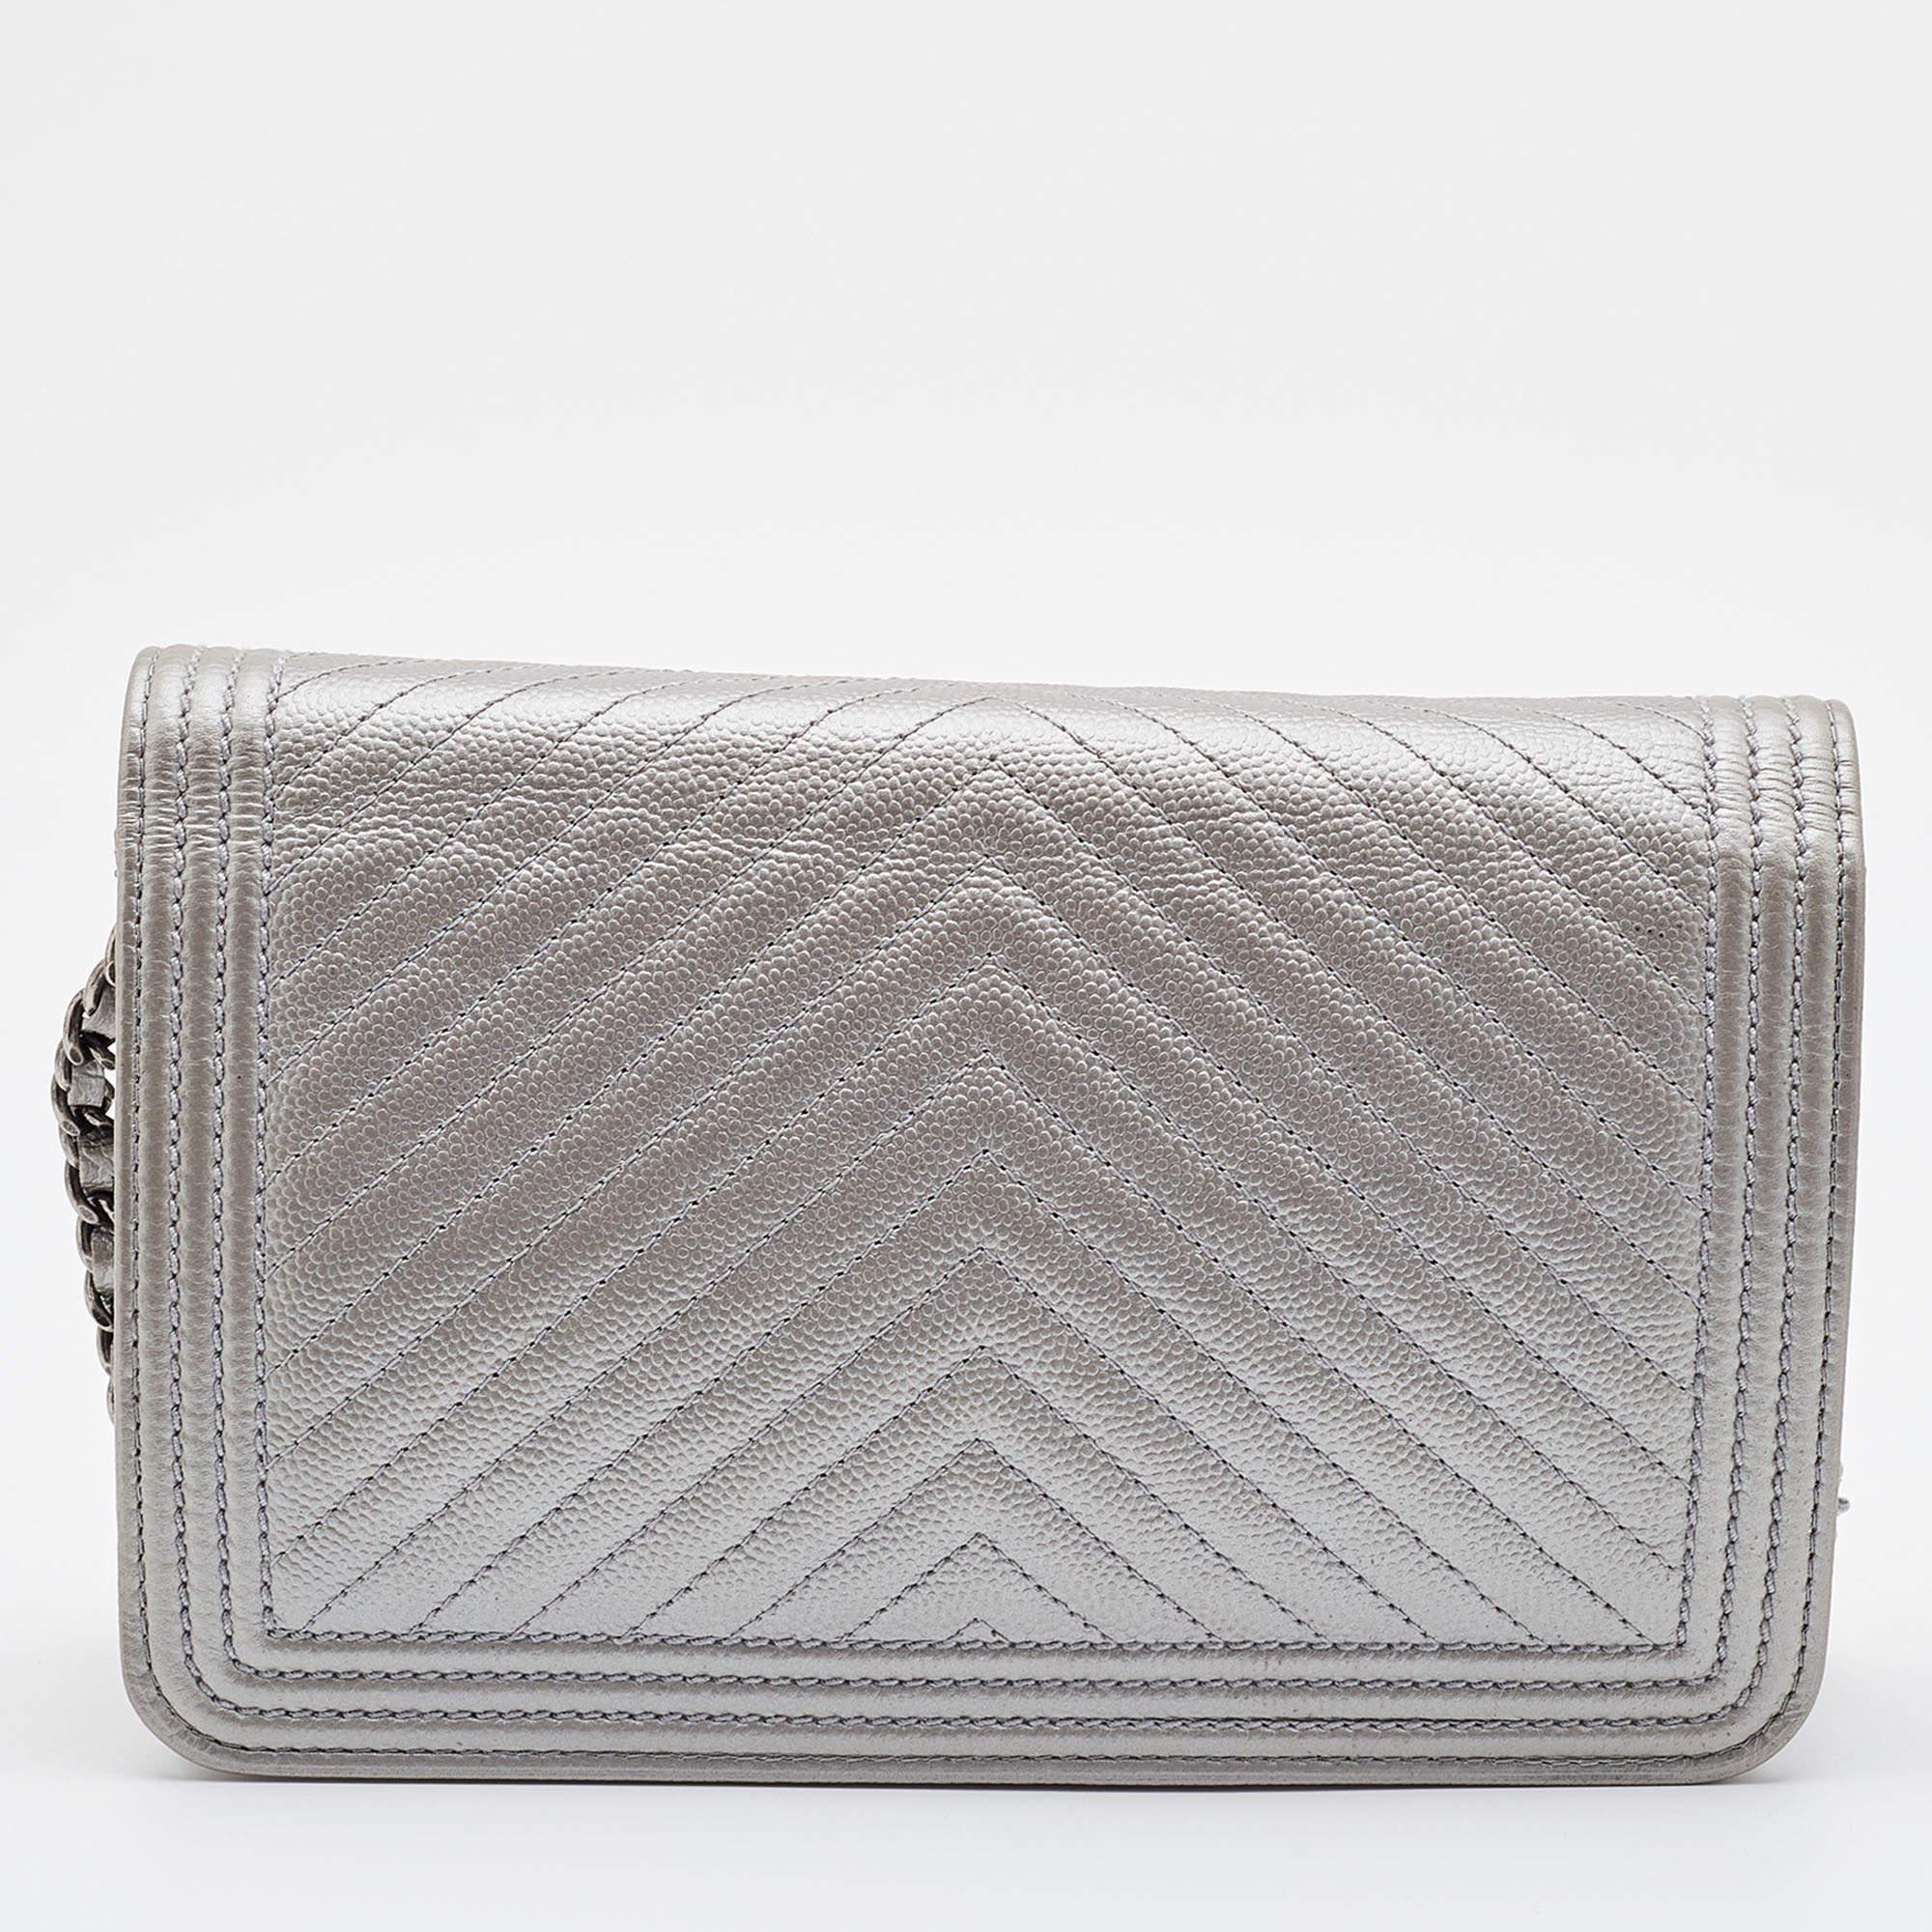 A WOC version of an iconic design, this Chanel Boy bag is beautifully crafted using chevron Caviar leather, and it has recognizable details. The exterior is covered in silver, and the flap is adorned with the CC logo lock. The Boy WOC is complete